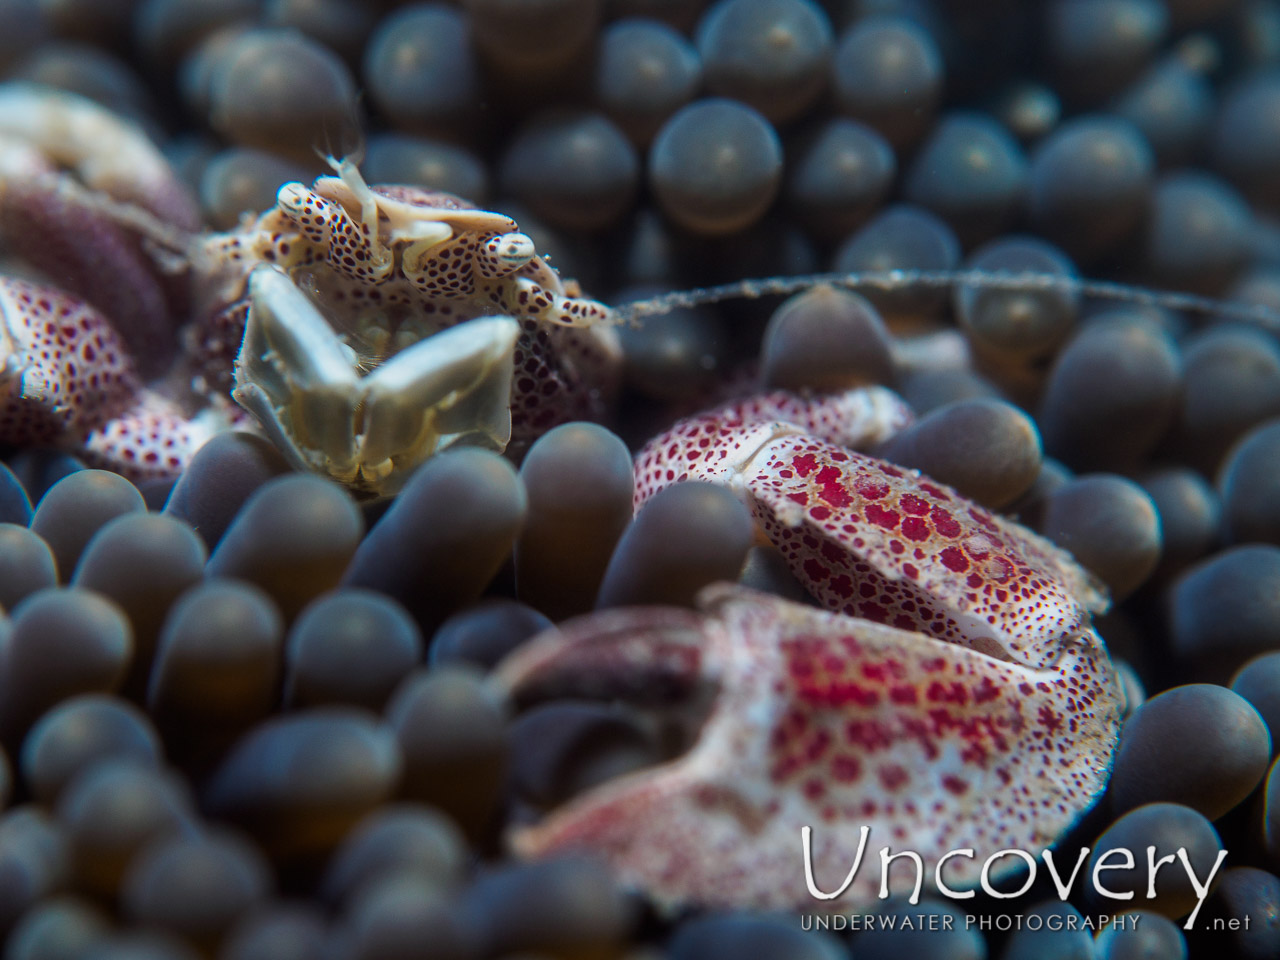 Spotted Porcelain Crab (neopetrolisthes Maculatus), photo taken in Philippines, Batangas, Anilao, Dive 7000